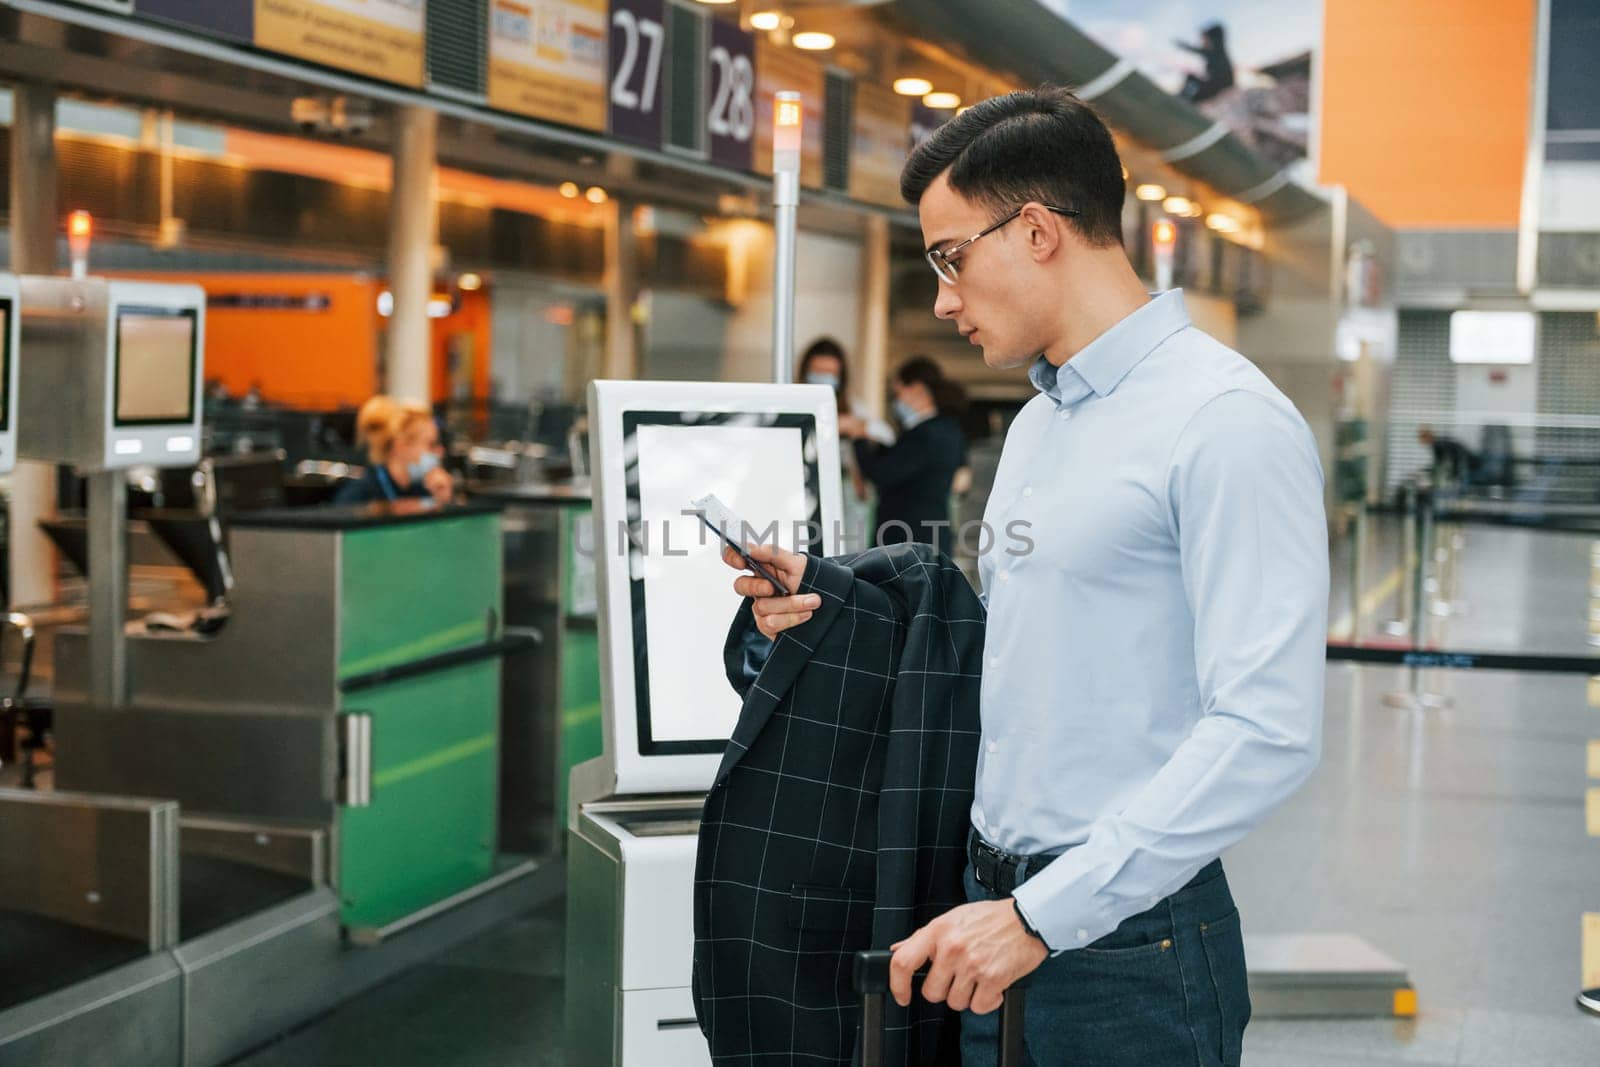 Holding phone. Young businessman in formal clothes is in the airport at daytime by Standret